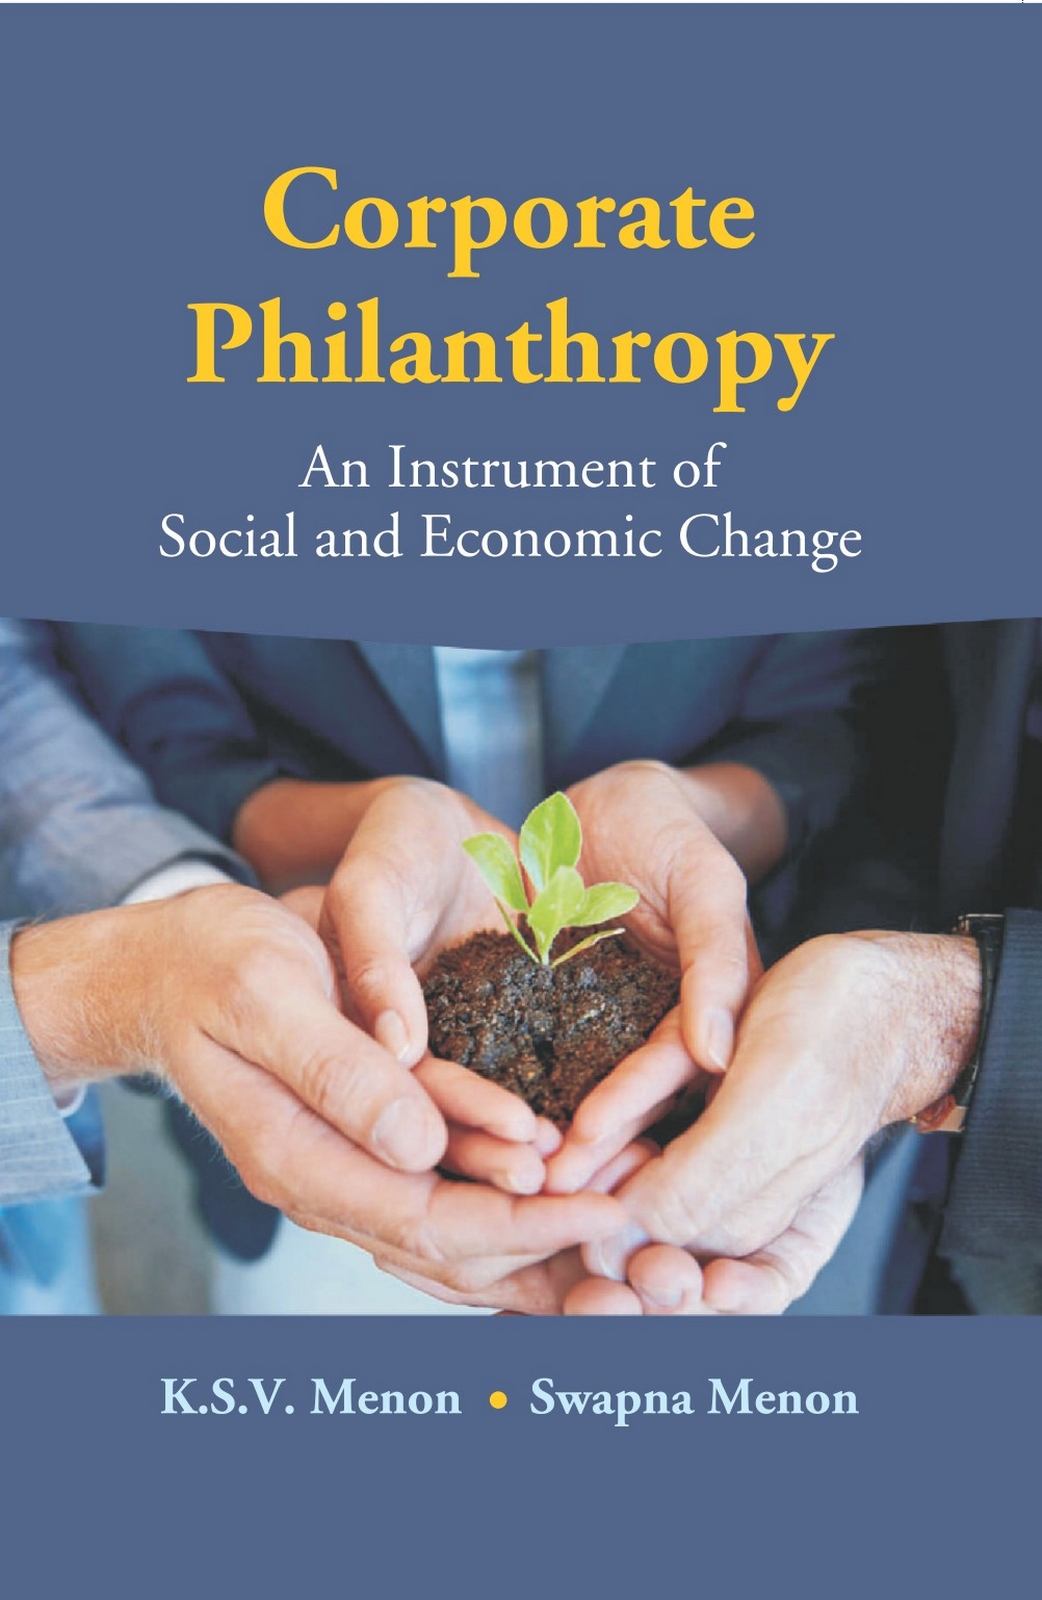 Corporate Philanthropy (An Instrument Of Social And Economic Change)